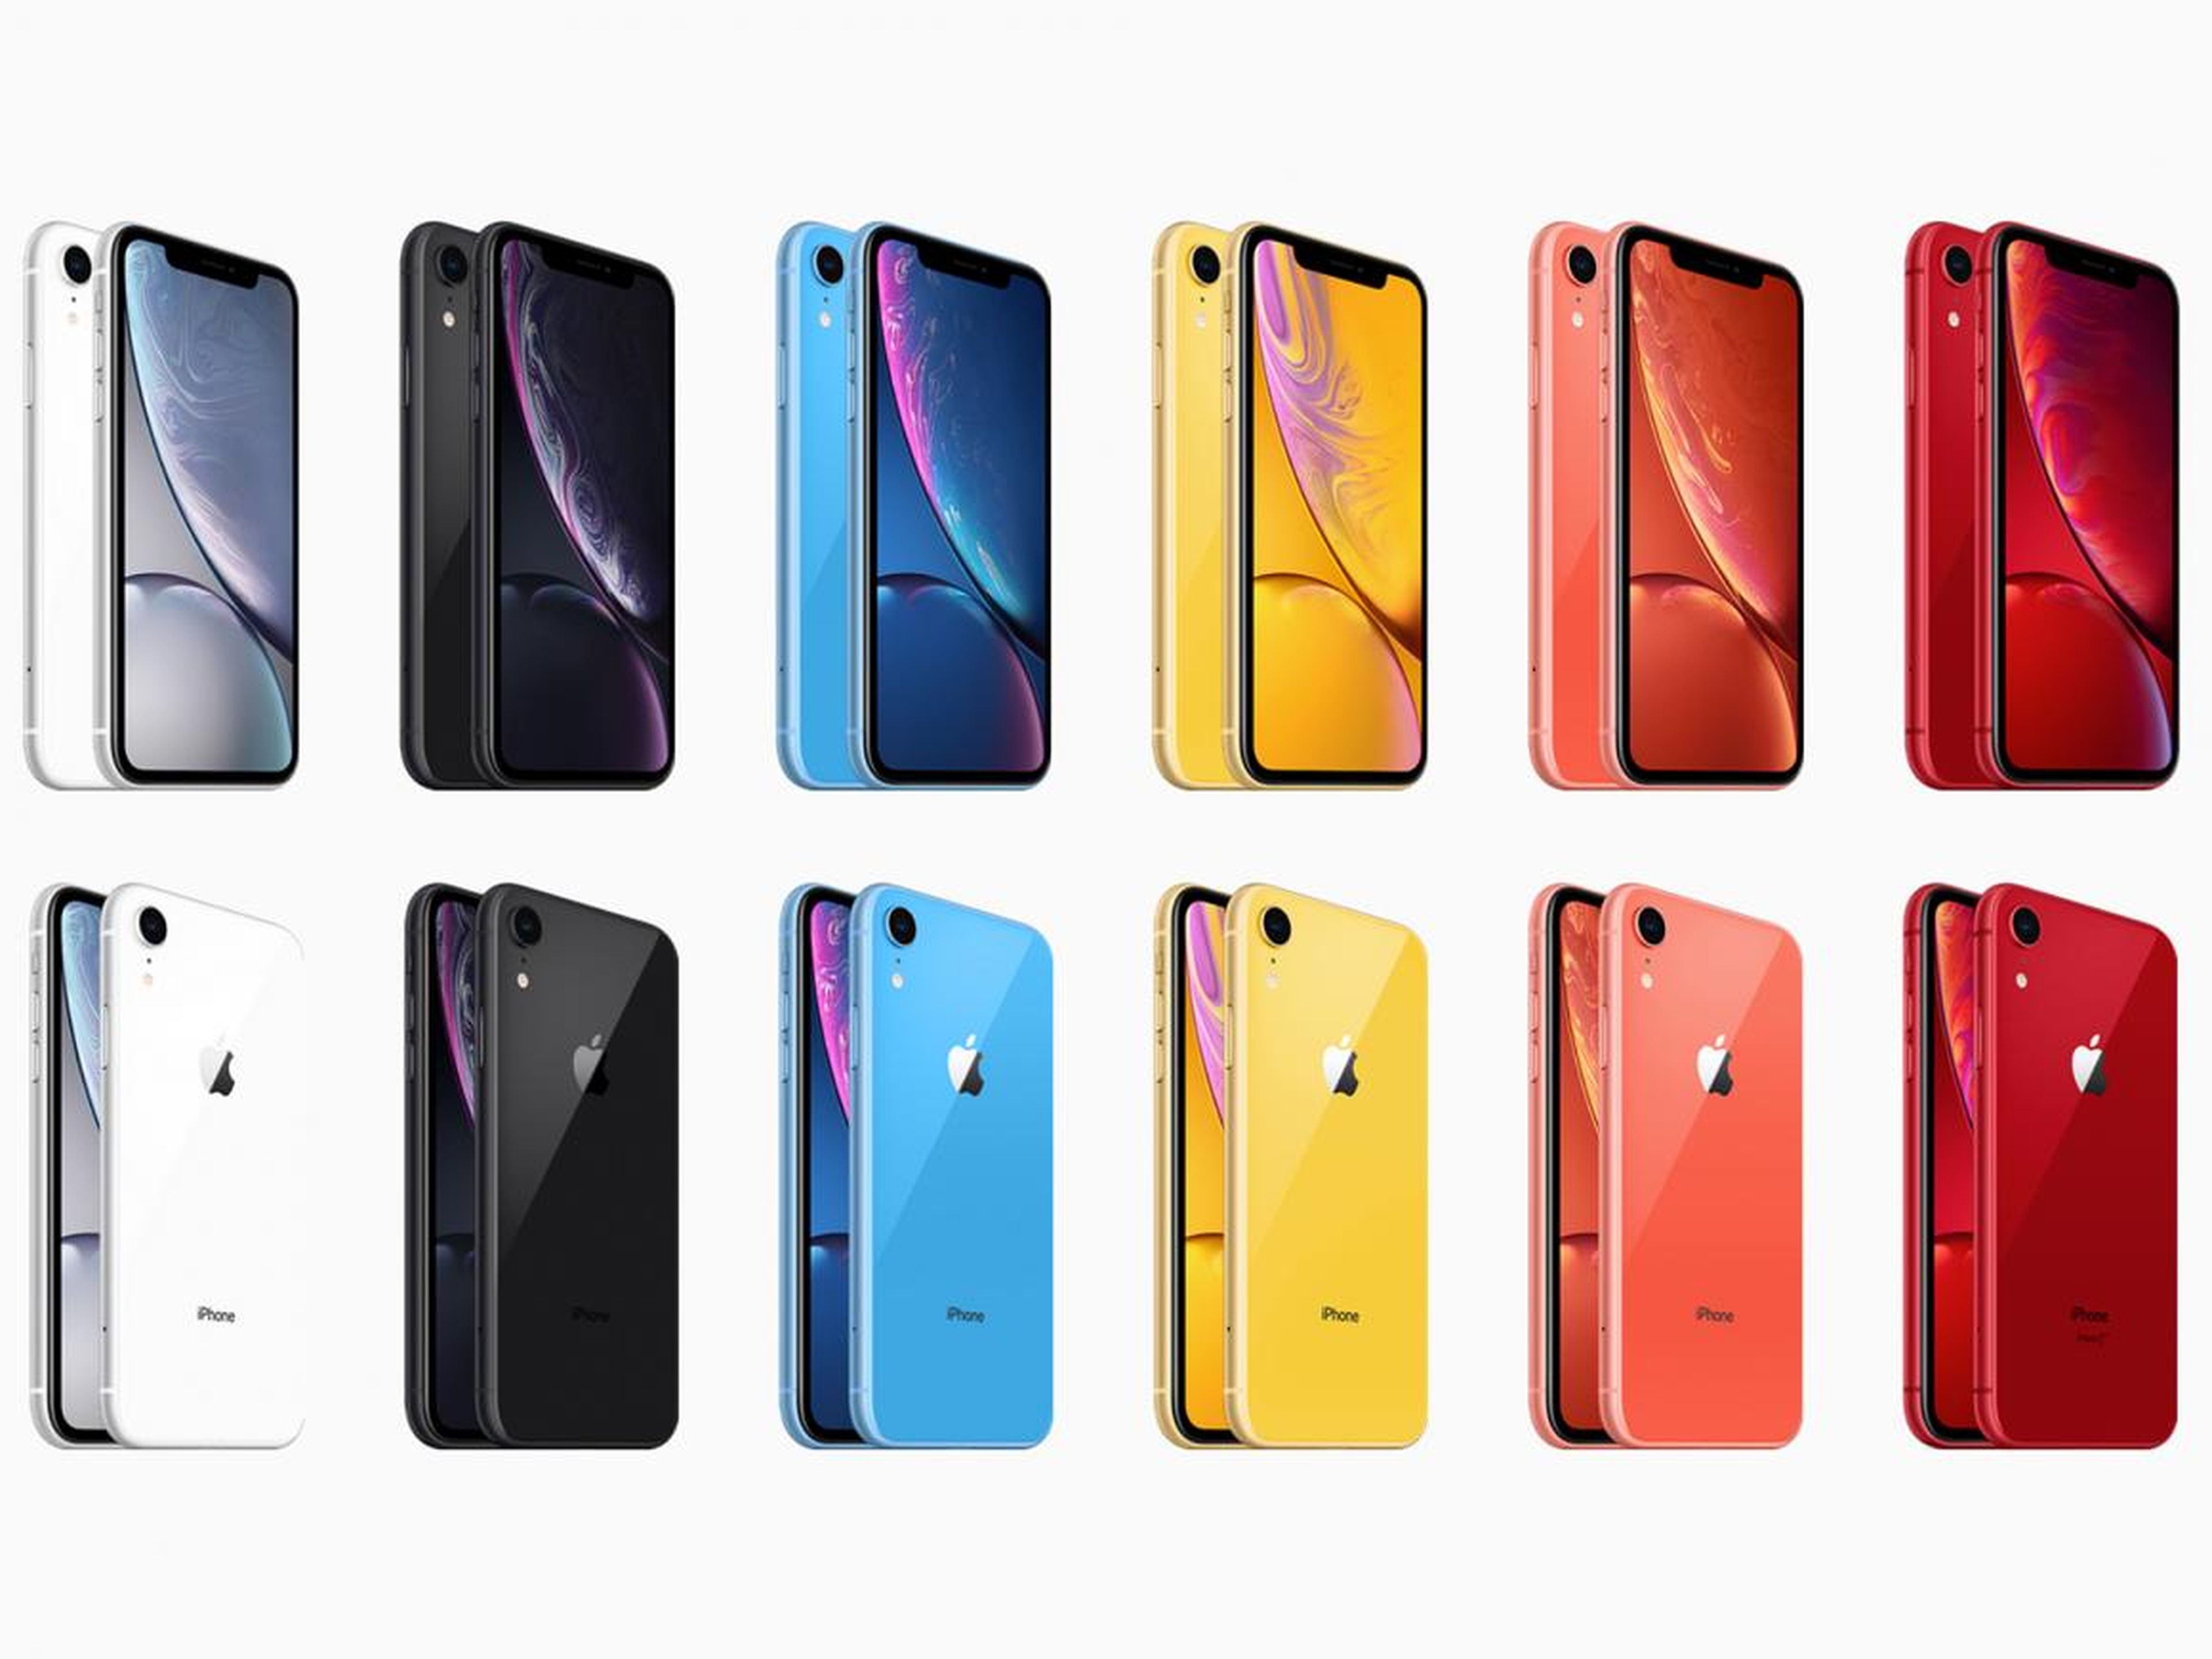 The colorful iPhone XR.